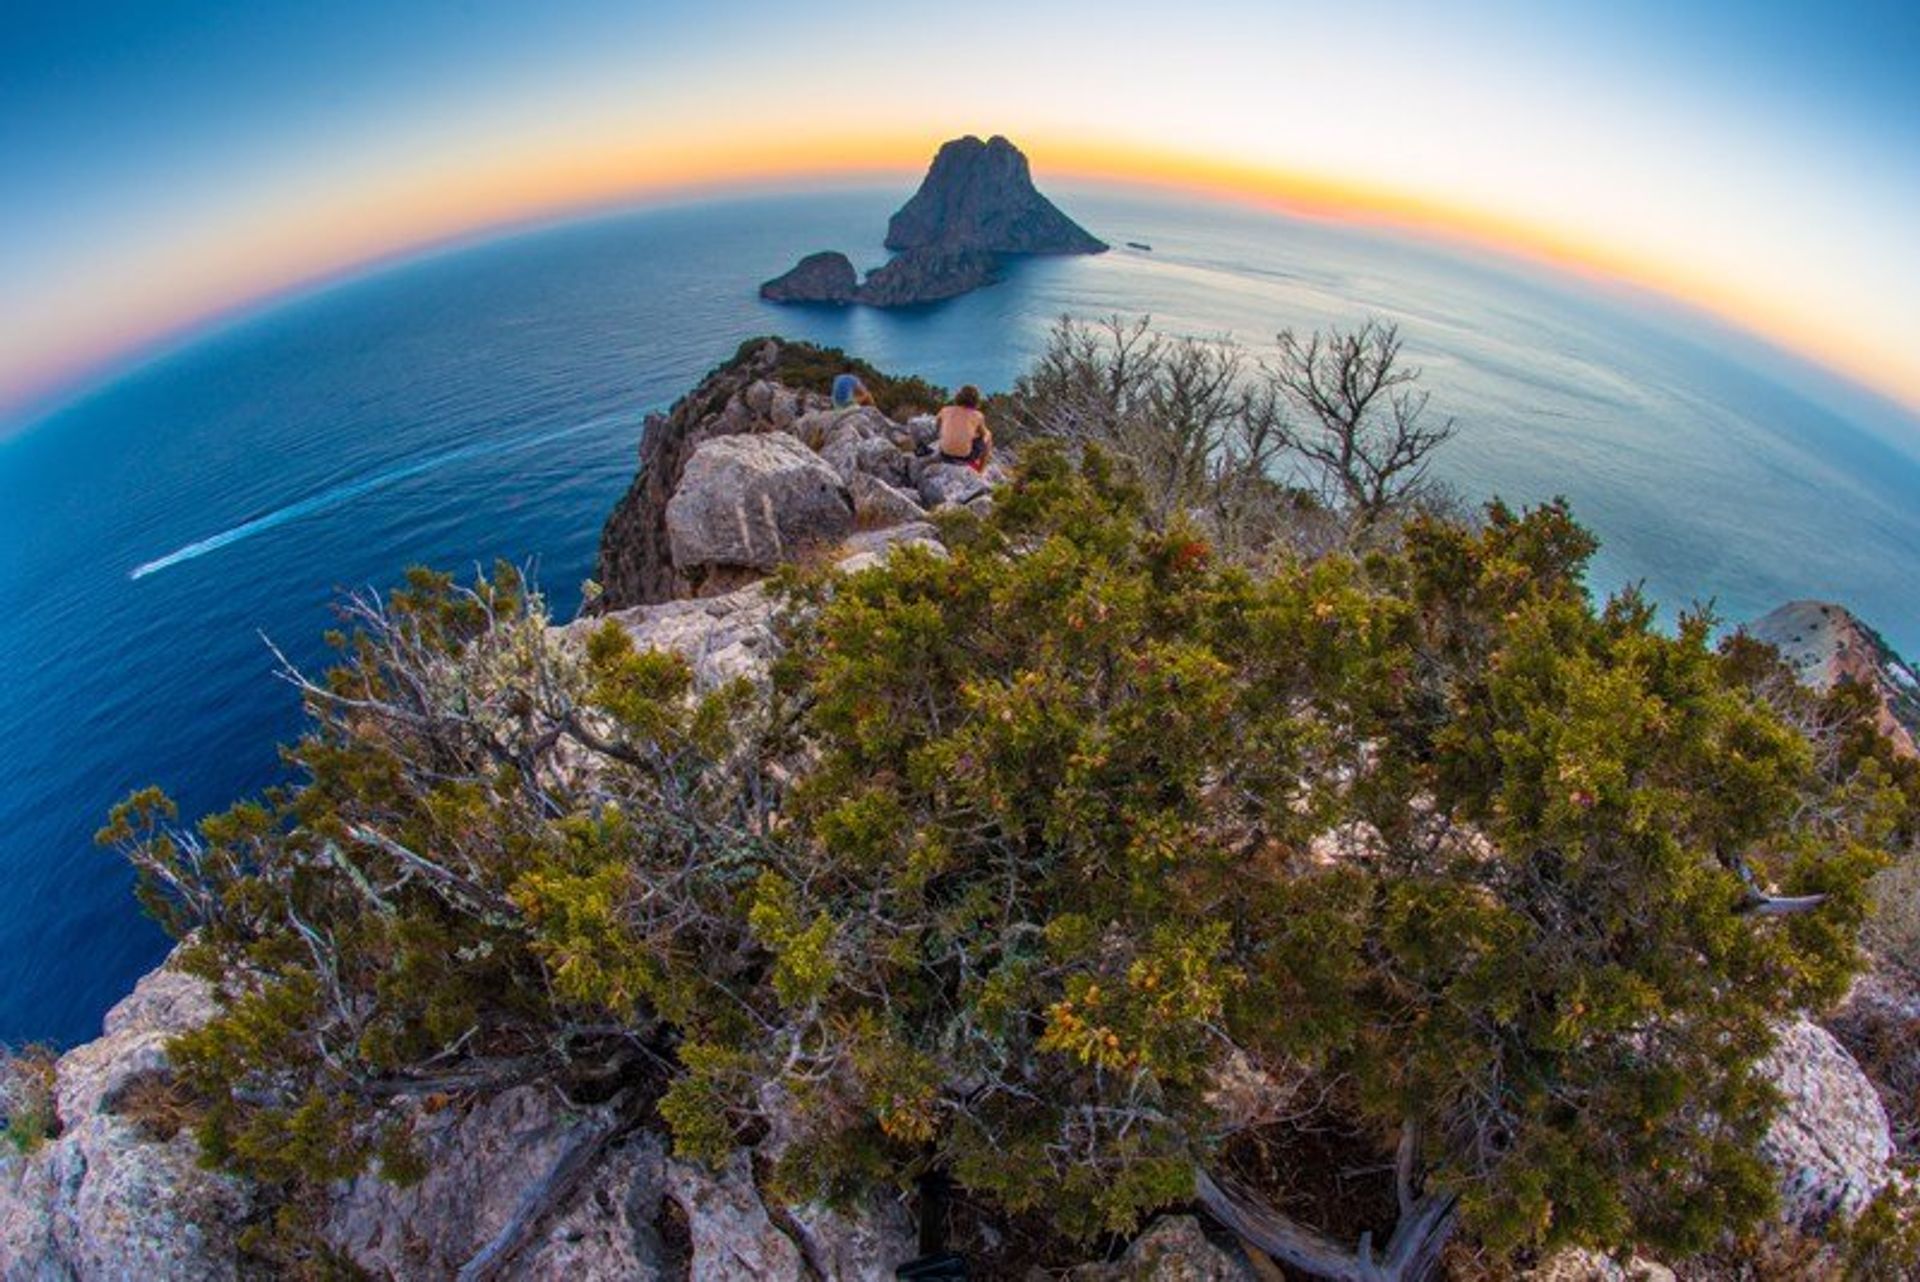 Panoramic views of the southwestern Ibiza coastline with Es Vedra in the background